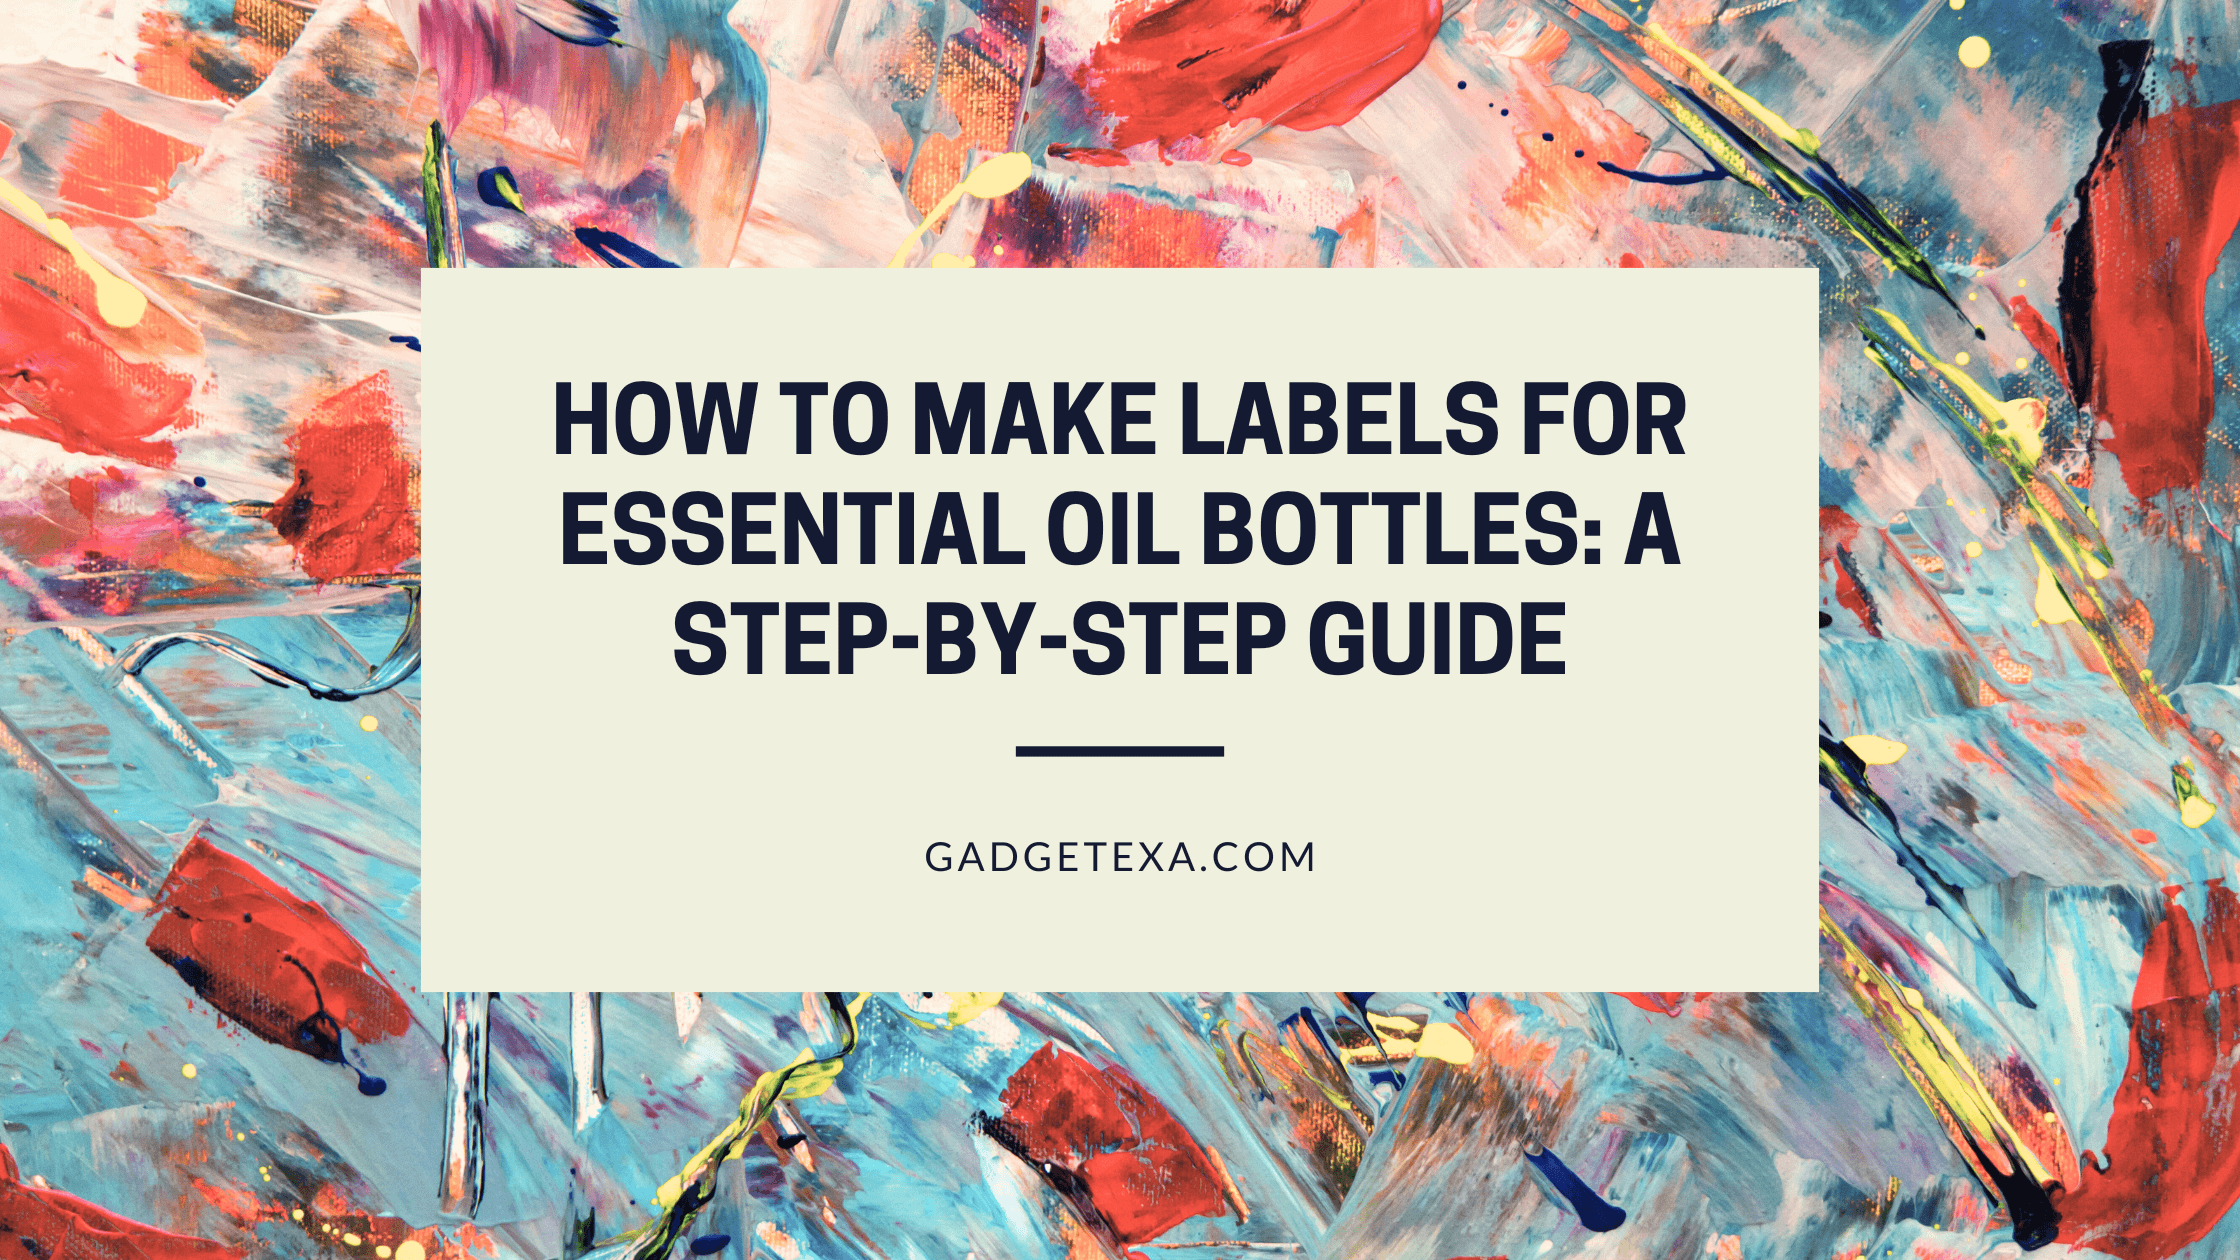 You are currently viewing How to Make Labels for Essential Oil Bottles: A Step-by-Step Guide